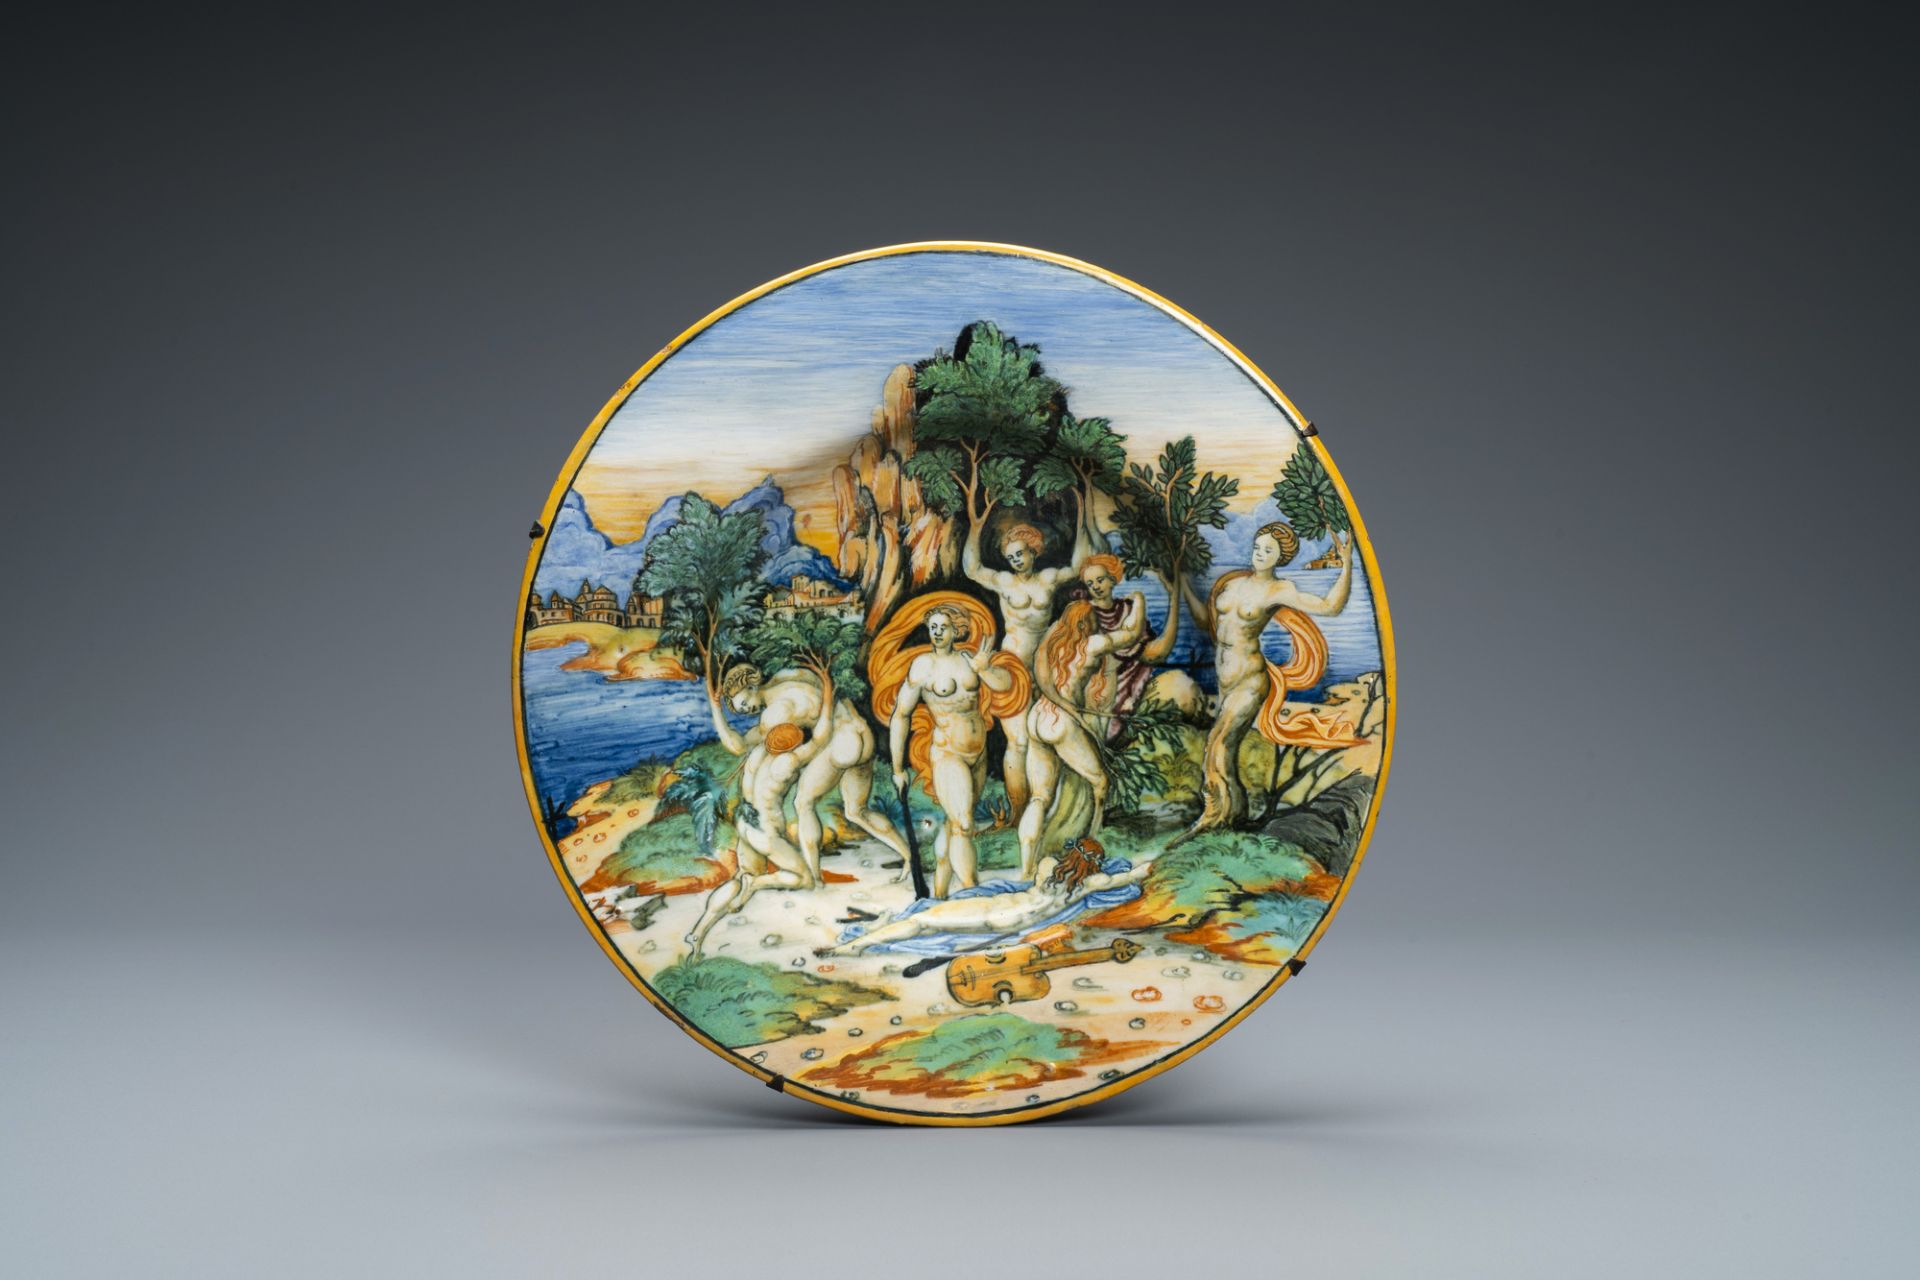 An Italian maiolica mythological subject 'The transformation of the Maenads' dish from the Lanciarin